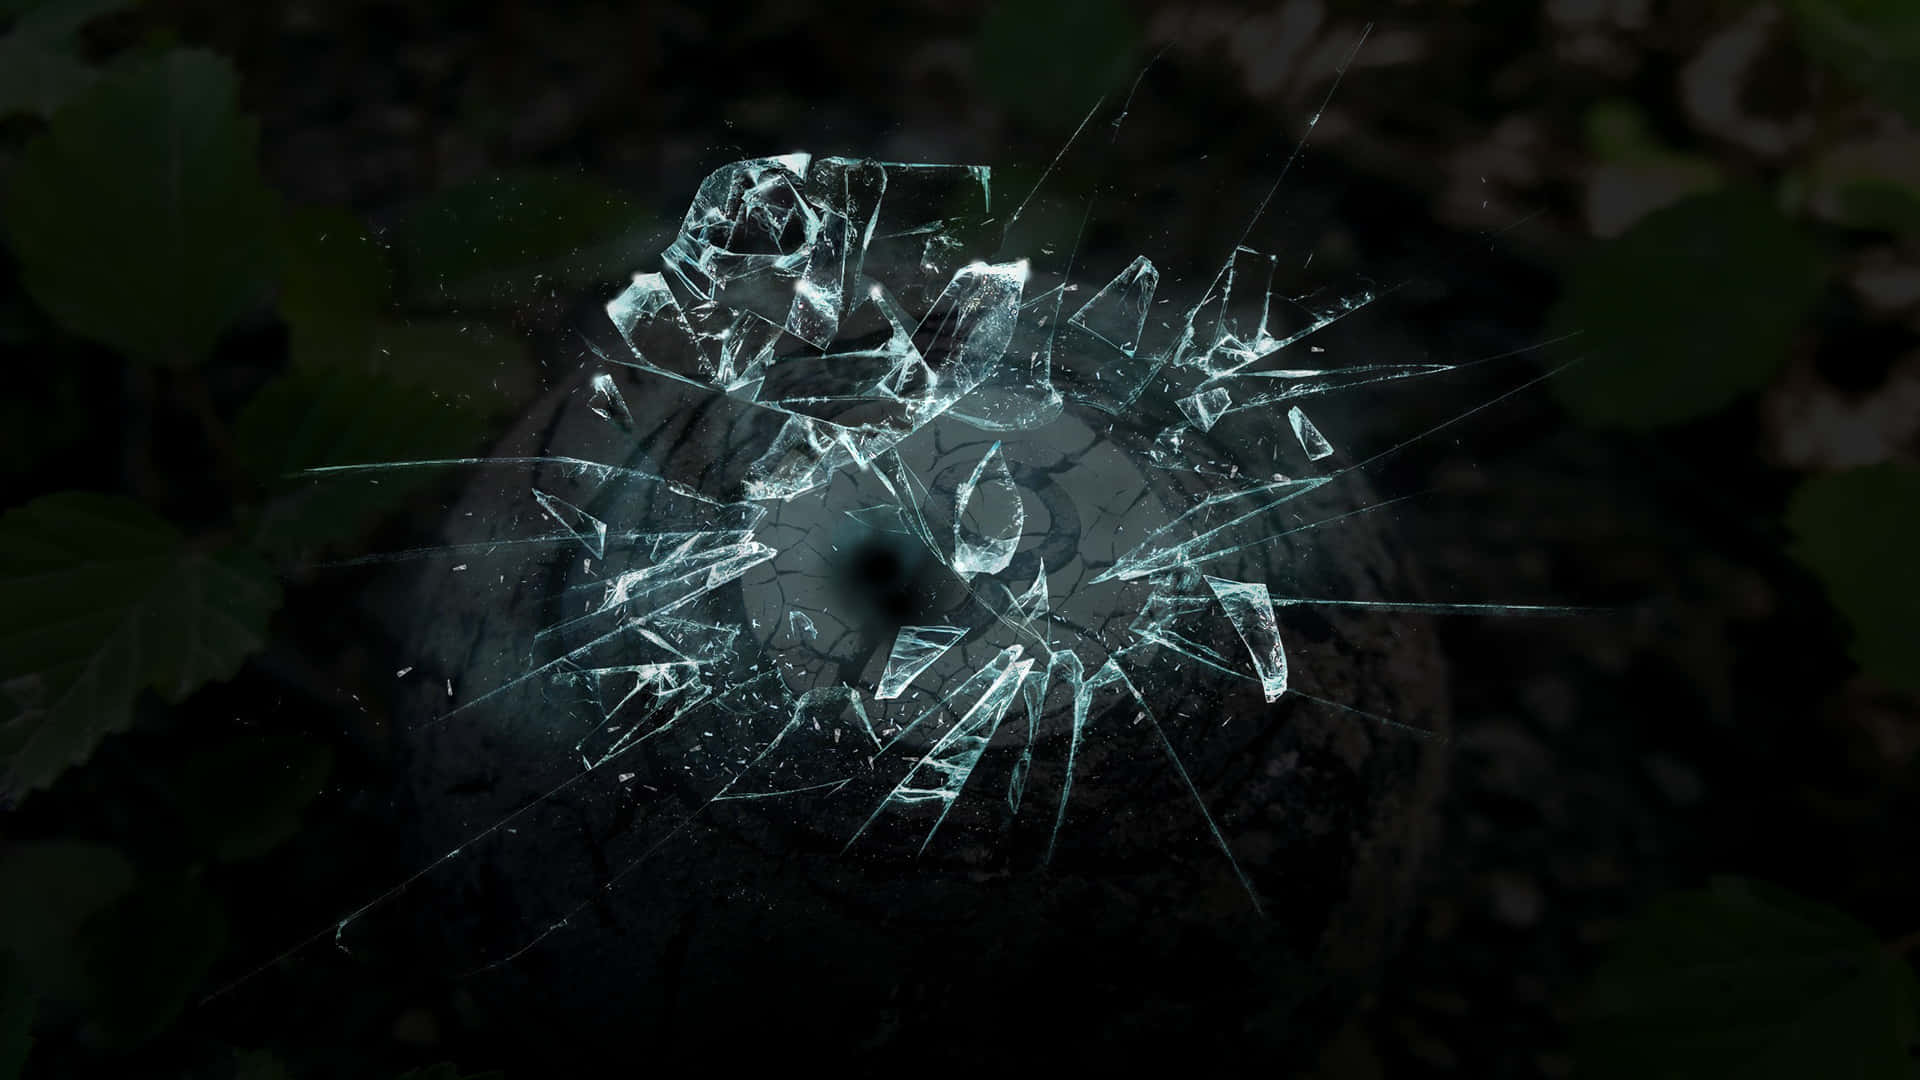 Fracture Glass Shards Ball Picture